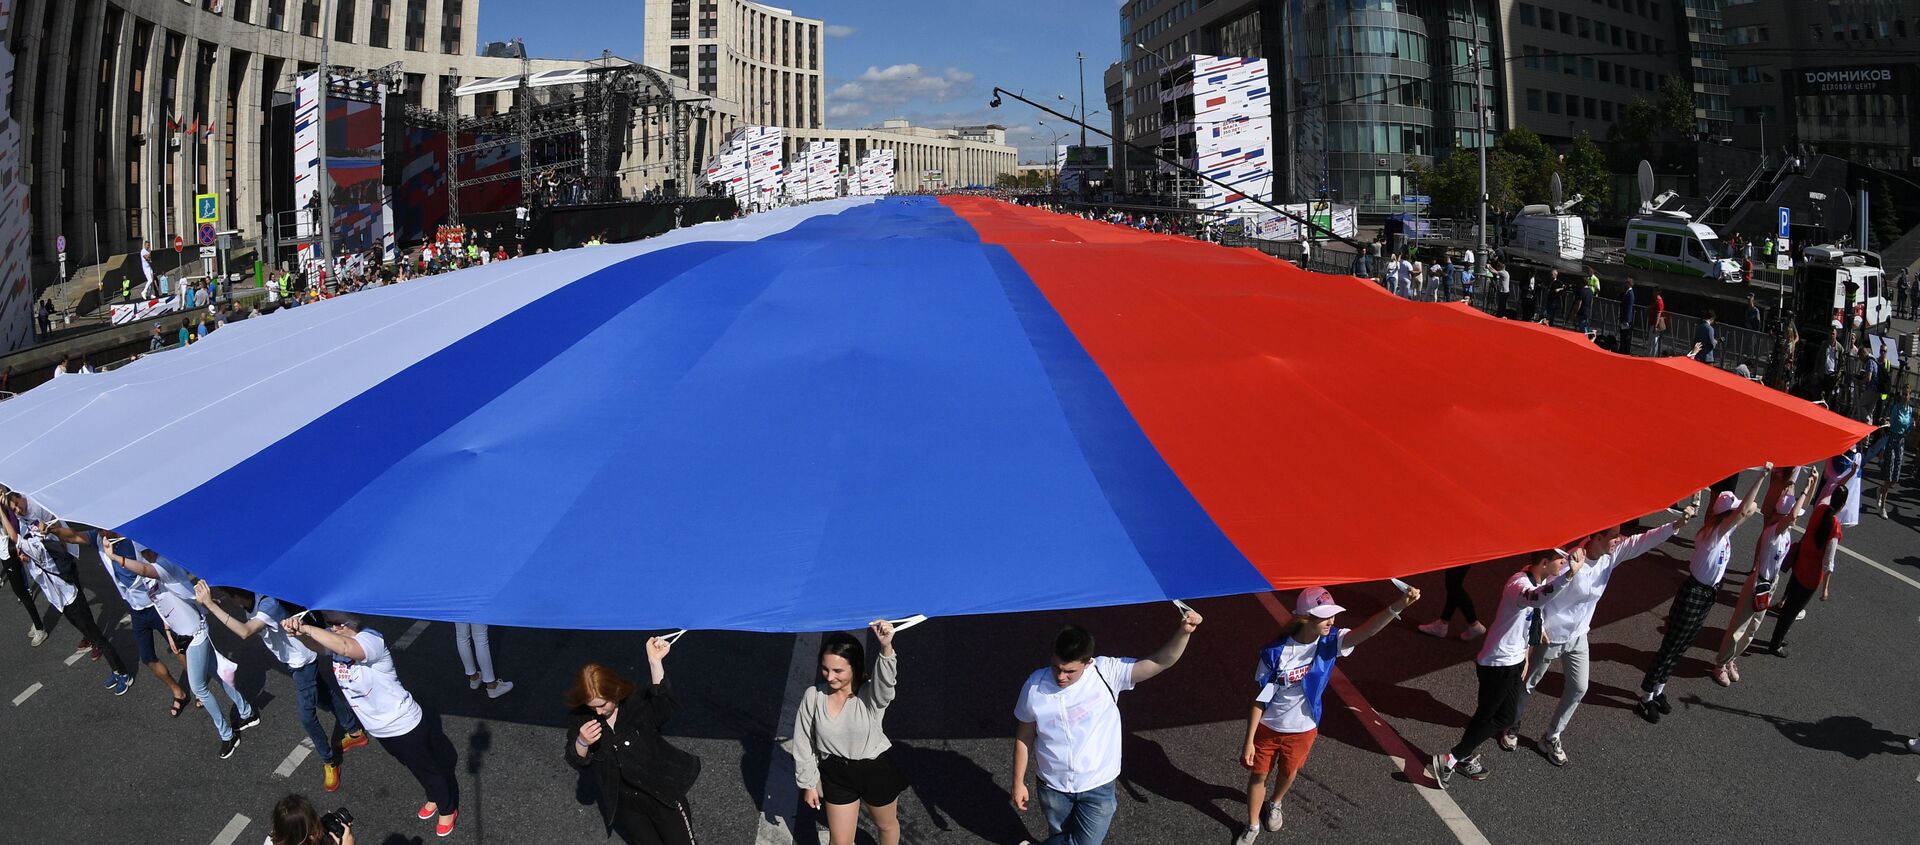 Flash mob participants during the Russian National Flag Day in Moscow   - Sputnik International, 1920, 17.12.2020